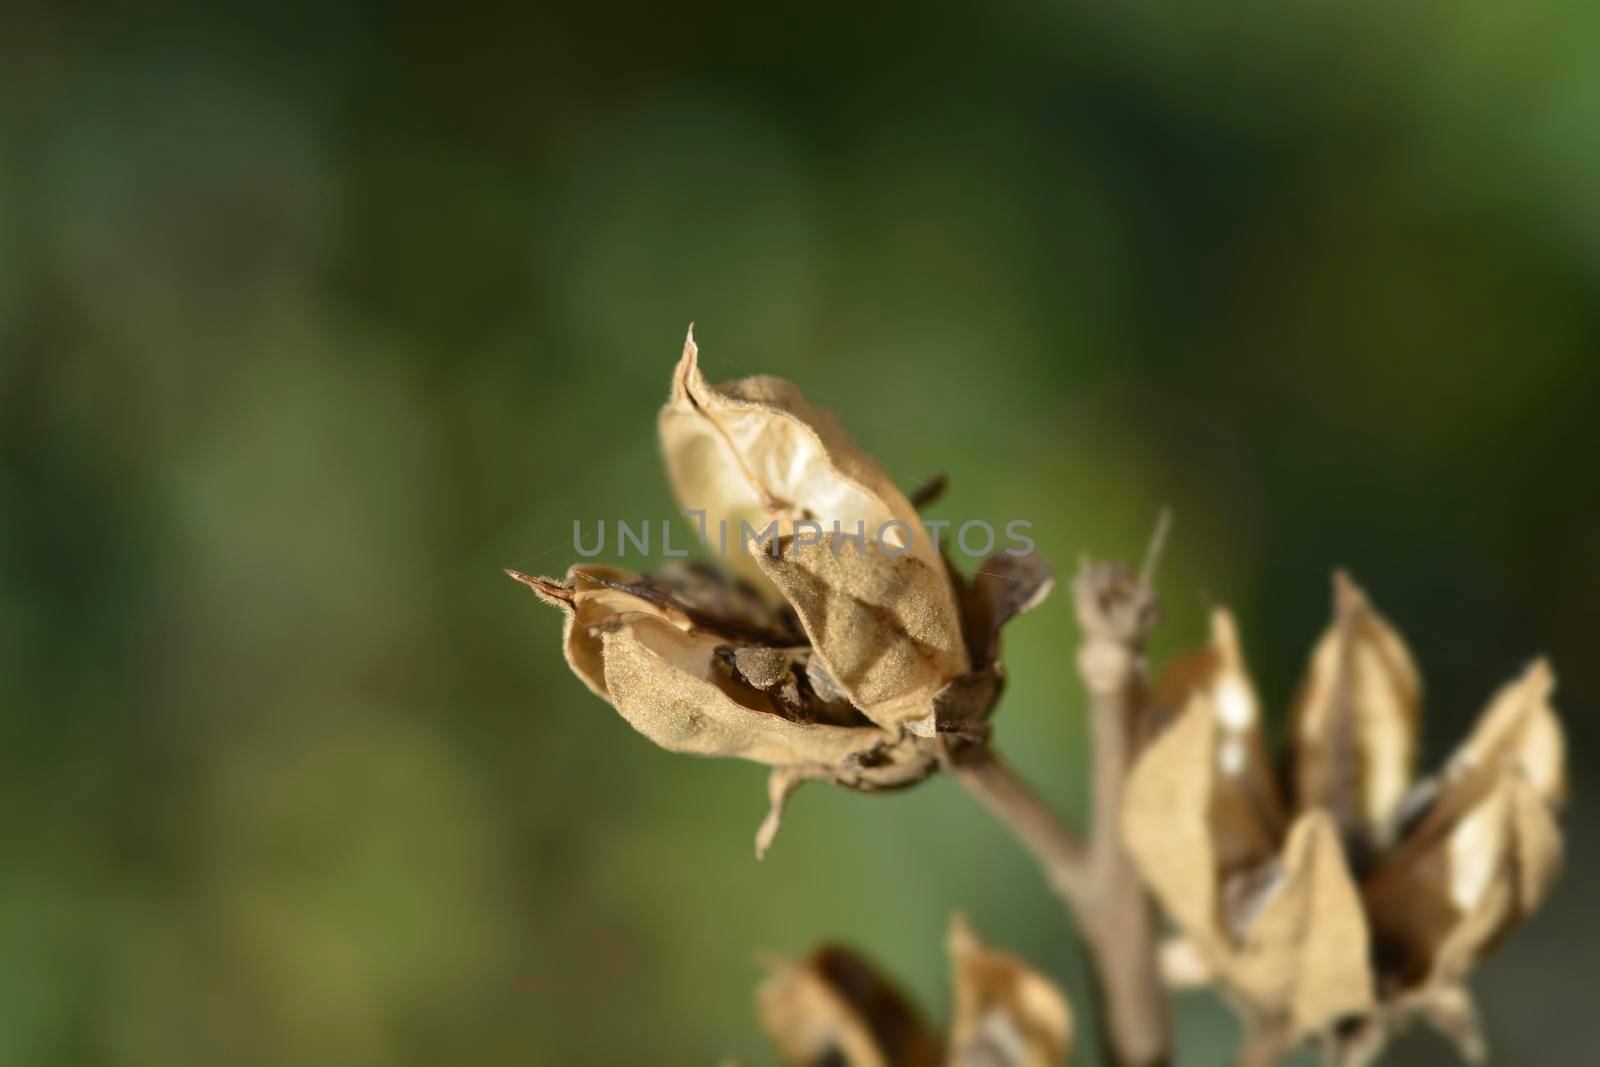 Rose Of Sharon seed pods - Latin name - Hibiscus syriacus